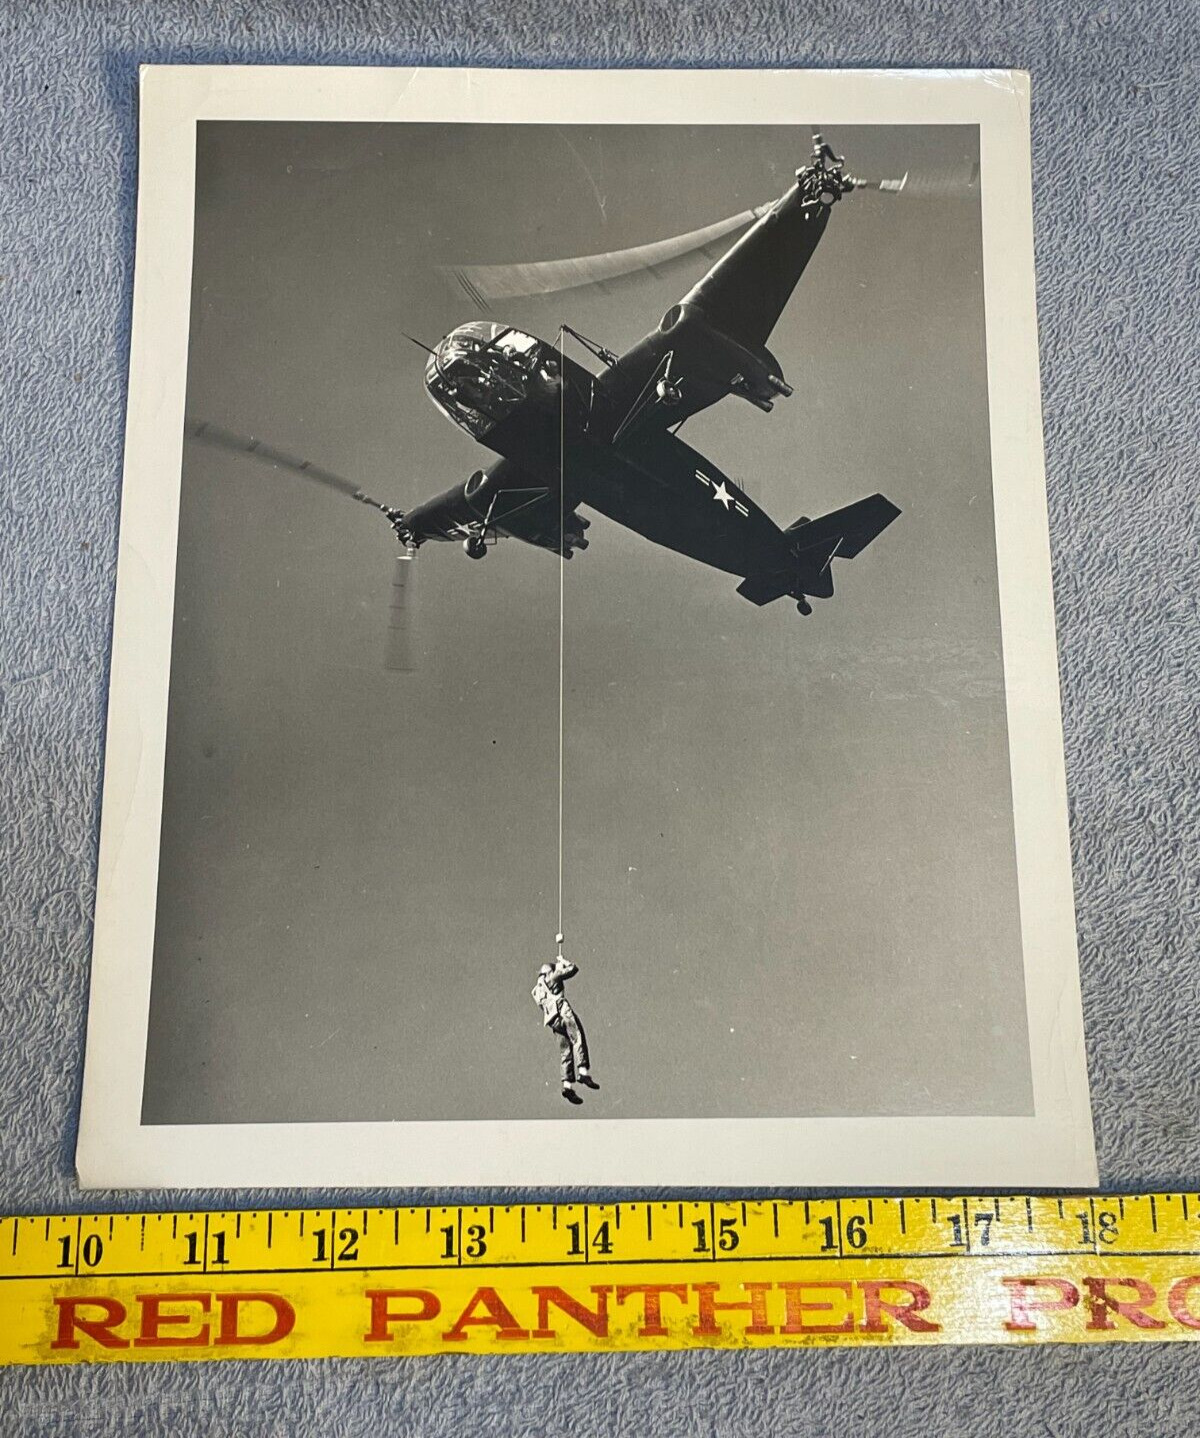 1950s Vintage 8x10 photo McDonnell Aircraft XHJD-1 WHIRLAWAY Test RESCUE Pilot